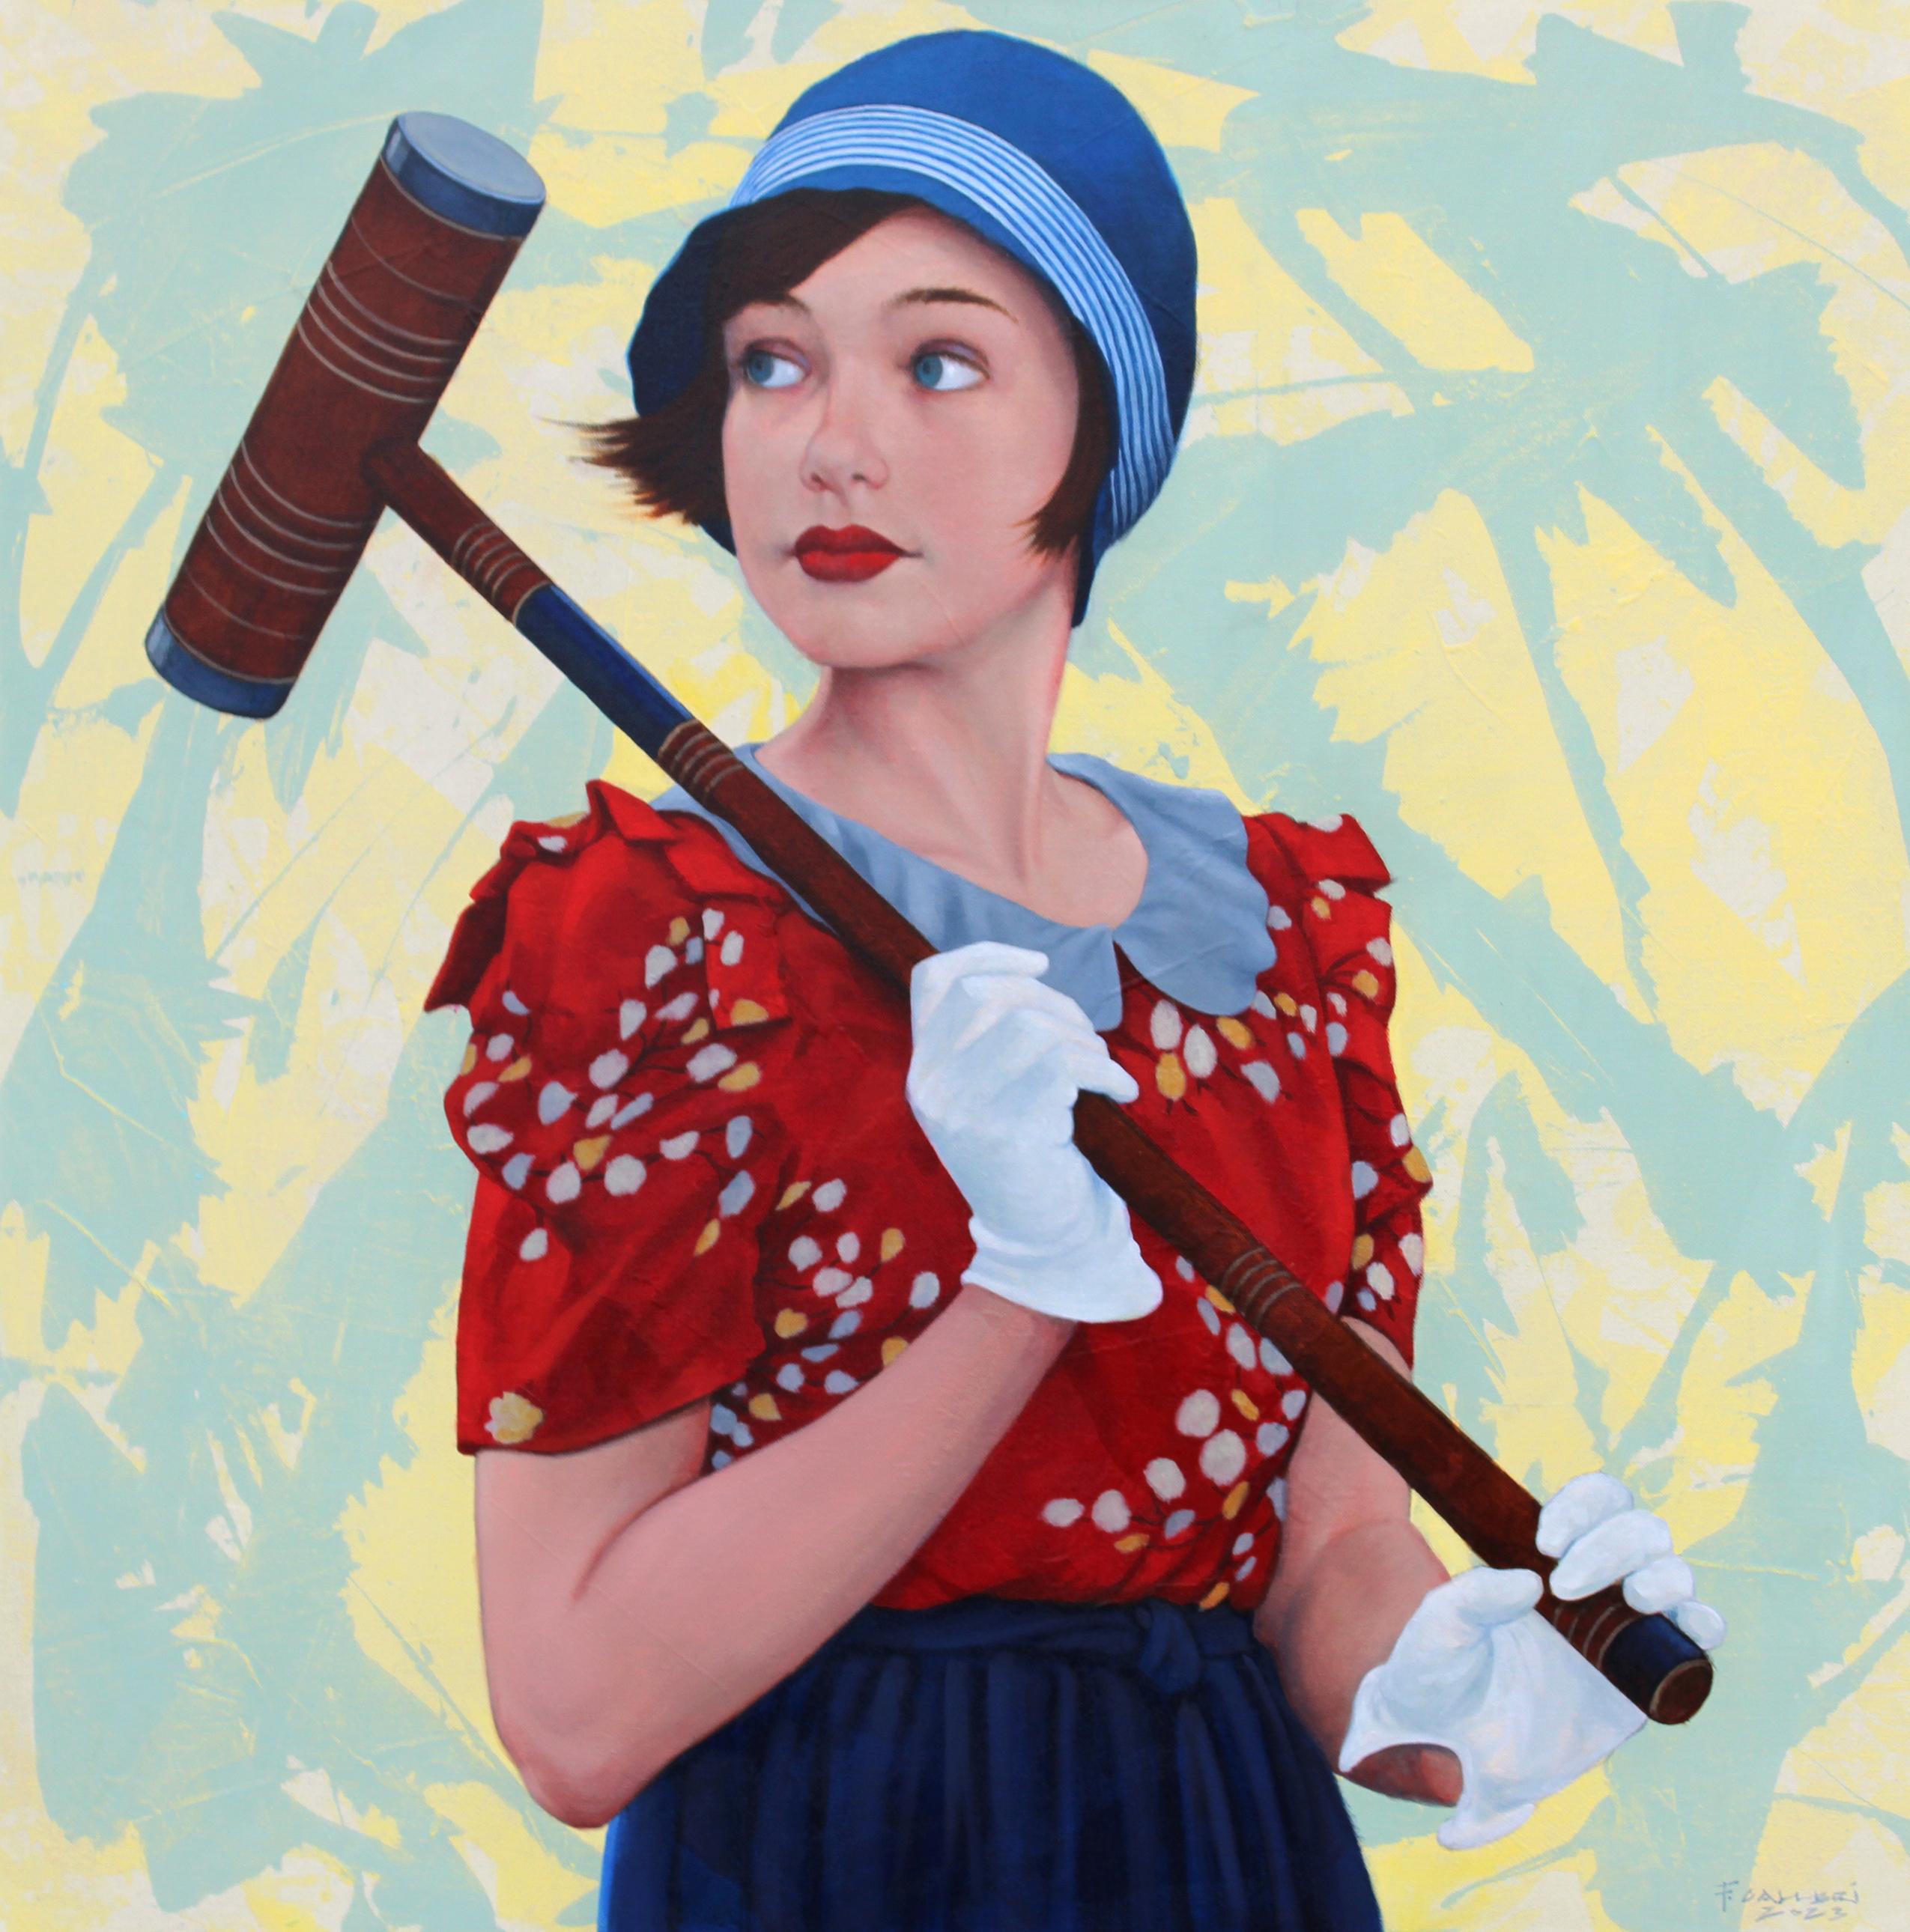 Fred Calleri Figurative Painting - "Croquet" oil painting of woman with red and navy dress, white gloves and hat